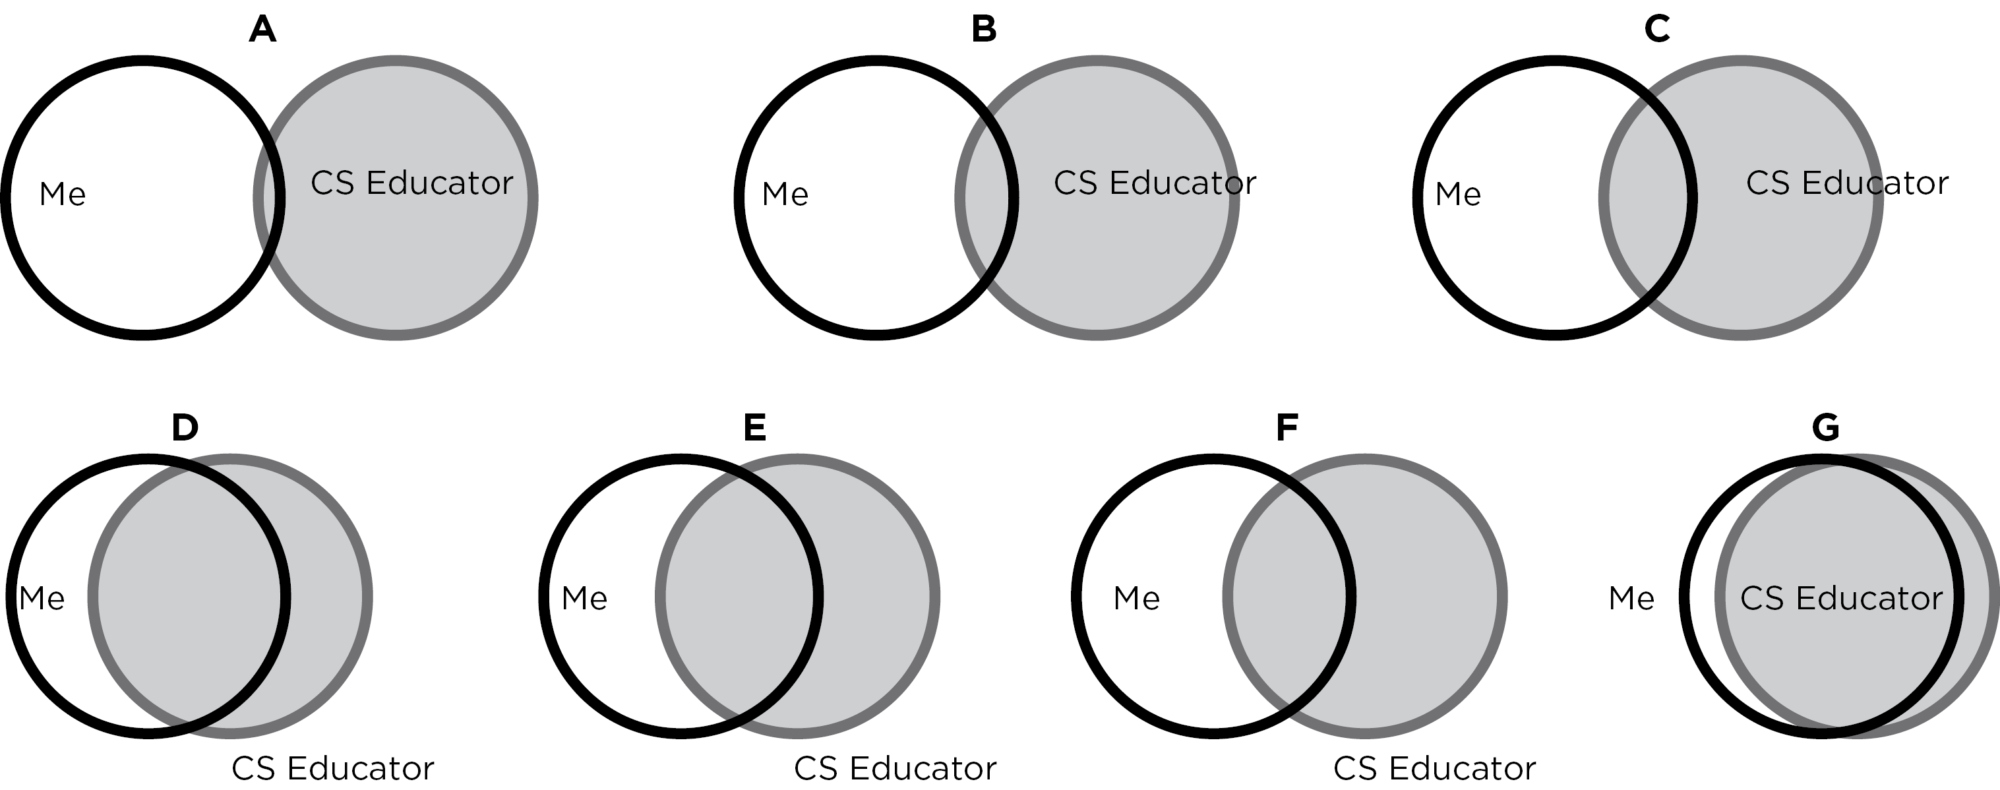 CS educator identification bubbles A (lowest) to G (highest)